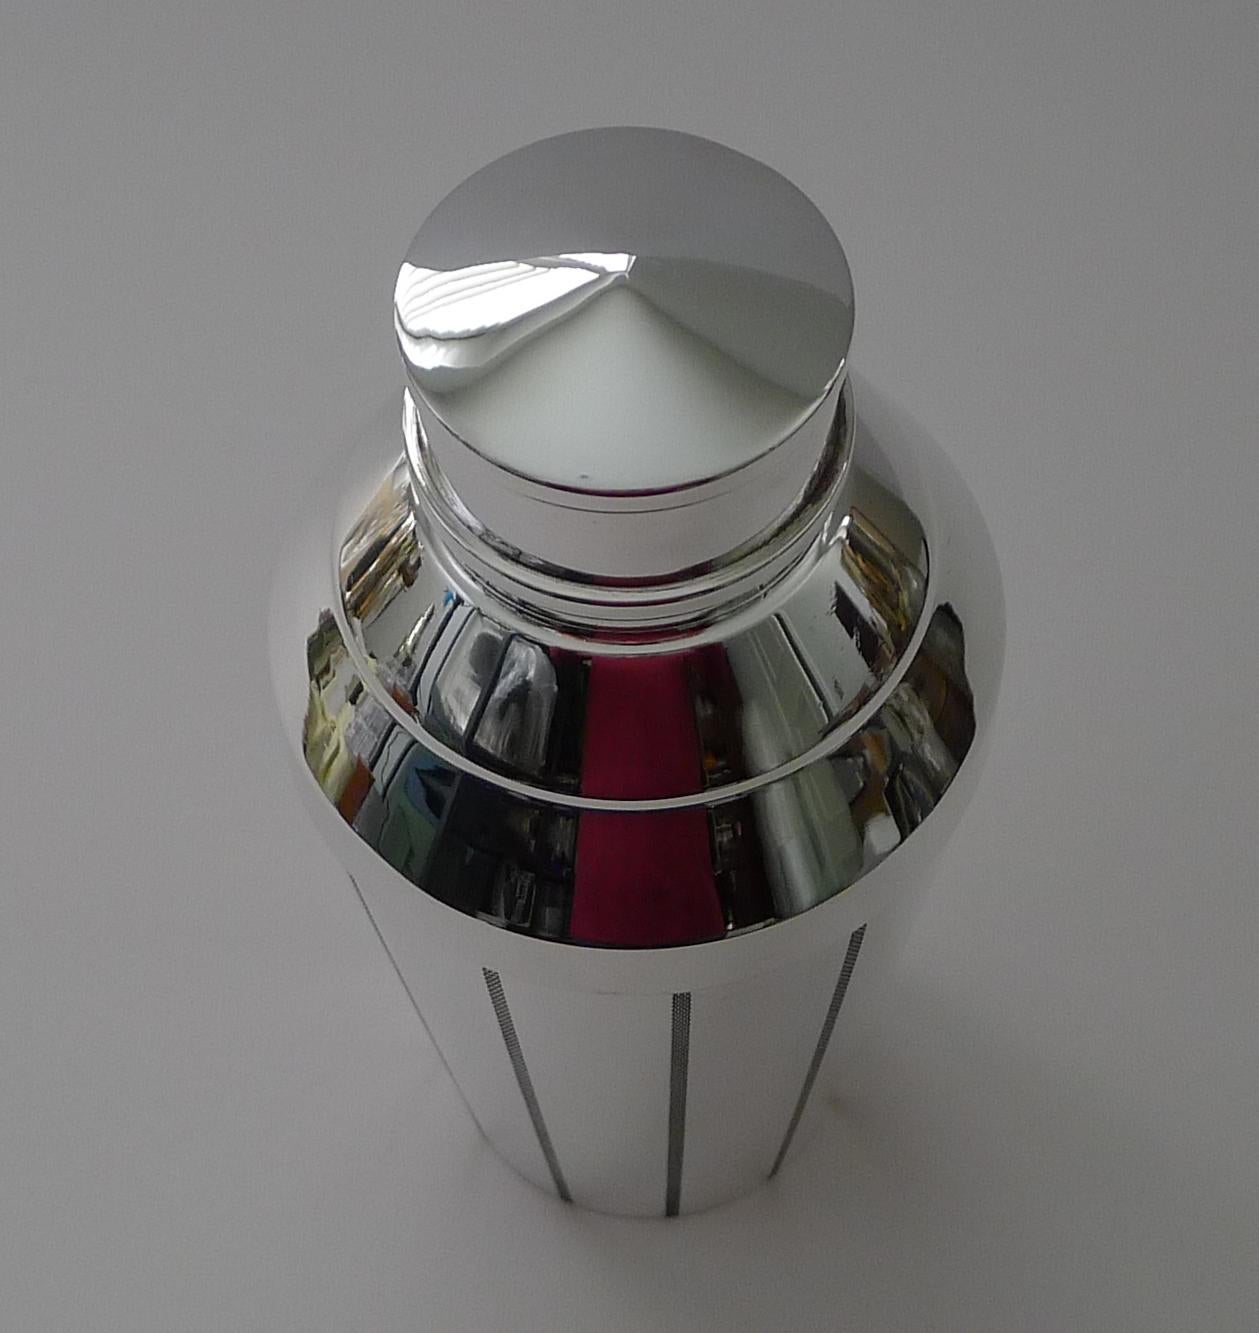 British Smart Late Art Deco Cocktail Shaker In Silver Plate c.1940